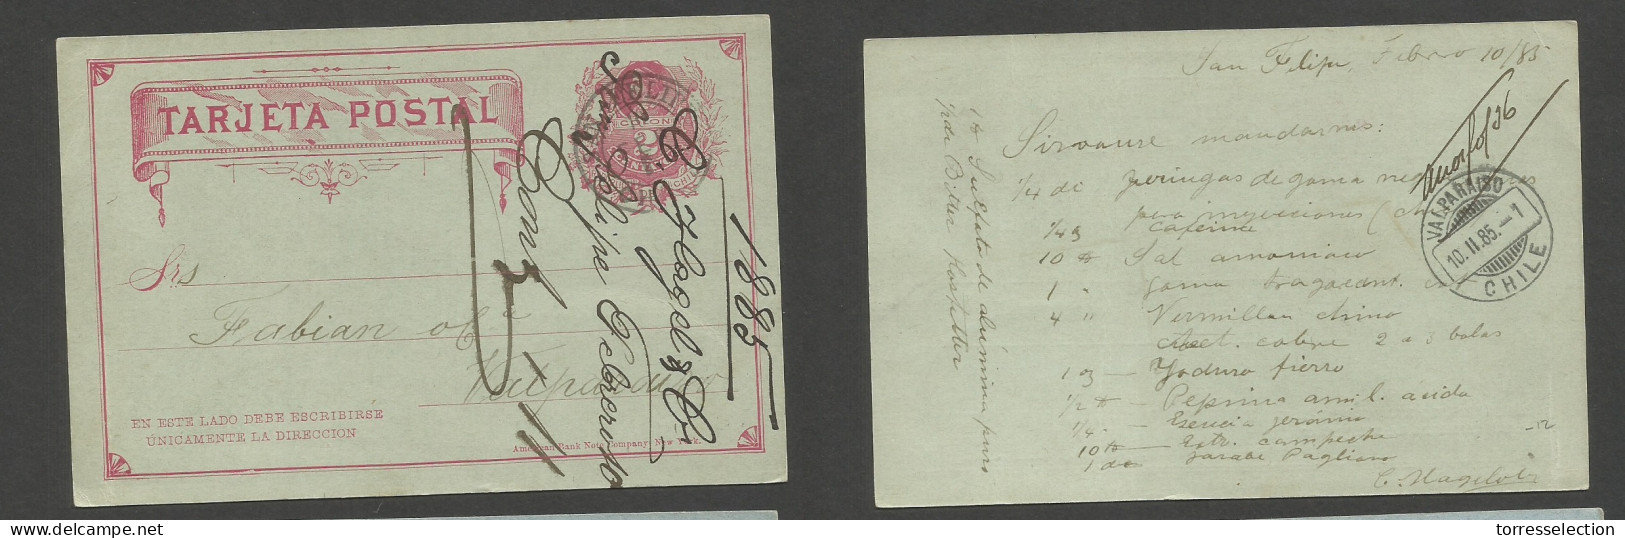 CHILE - Stationery. 1885 (10 Feb) San Felipe - Valp 2c Red Bluish Stat Card. Fine Early Usage. SALE. - Cile